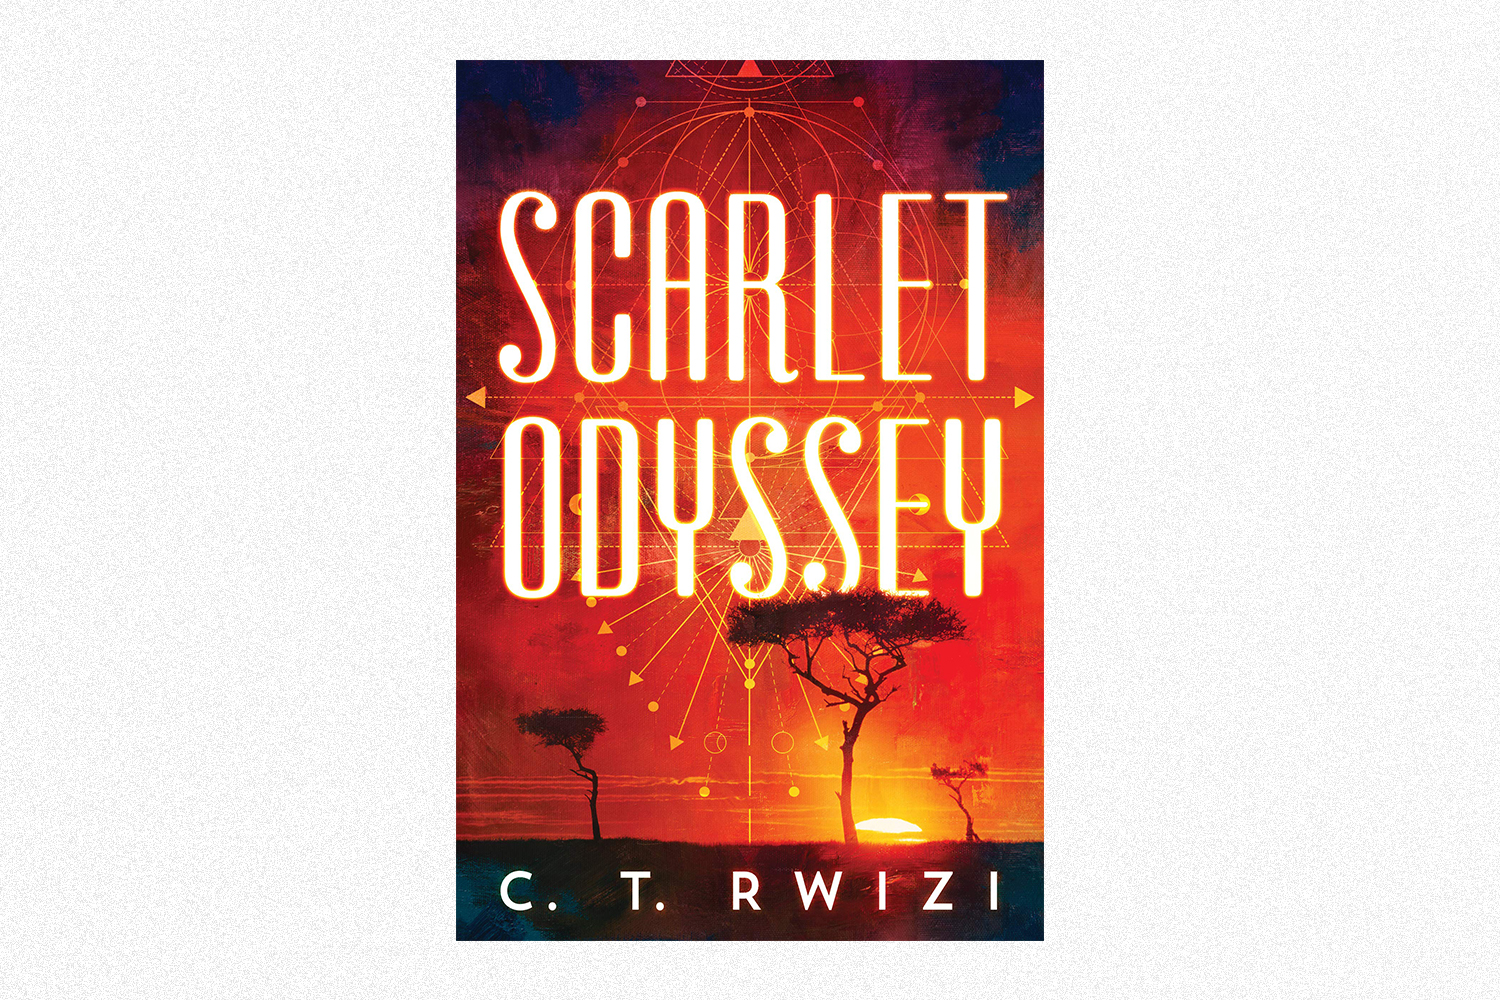 The book cover for Scarlet Odyssey by C.T. Rwizi